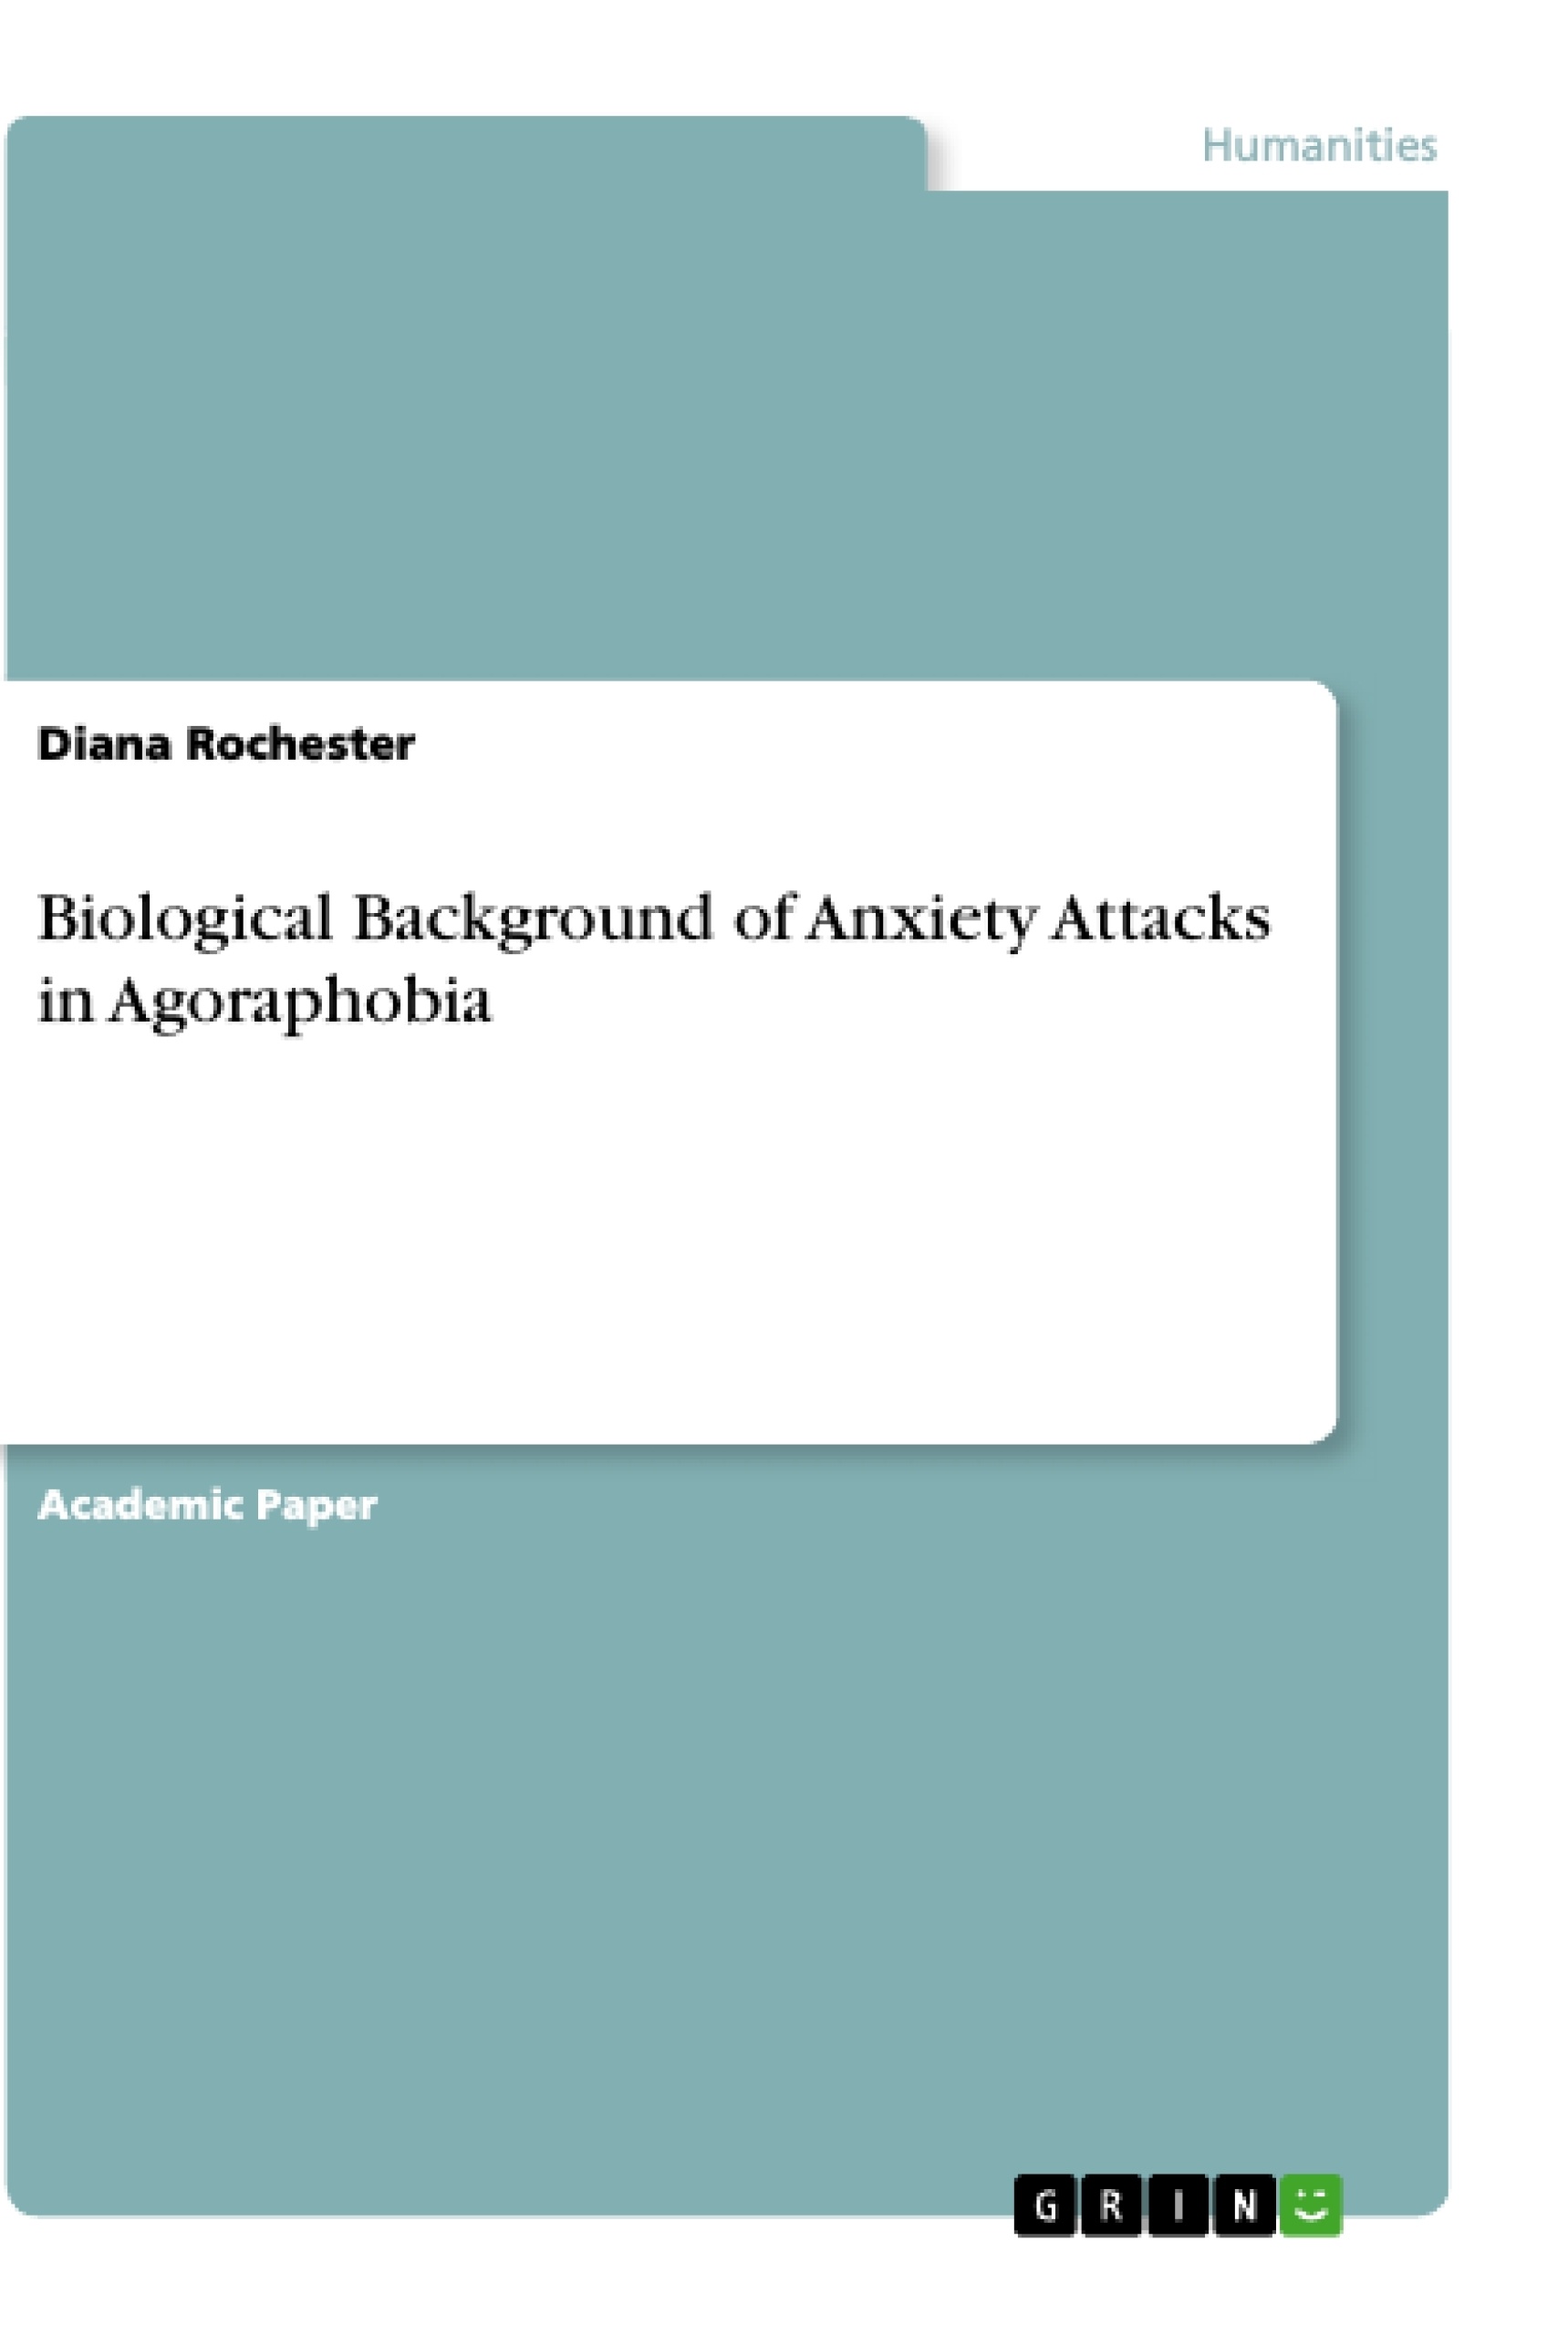 Título: Biological Background of Anxiety Attacks in Agoraphobia